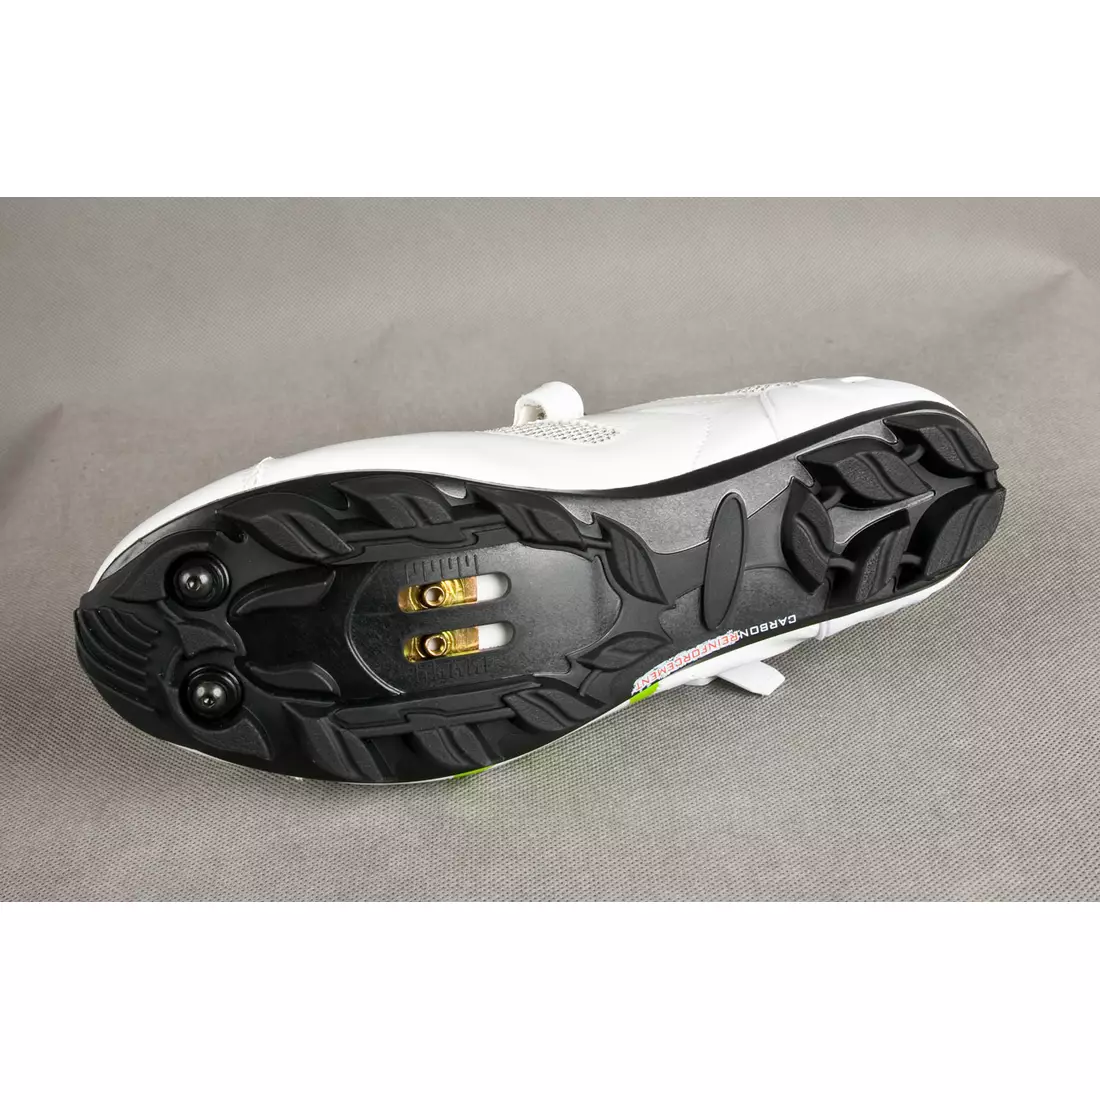 CRONO TRACK - MTB cycling shoes - color: White and green